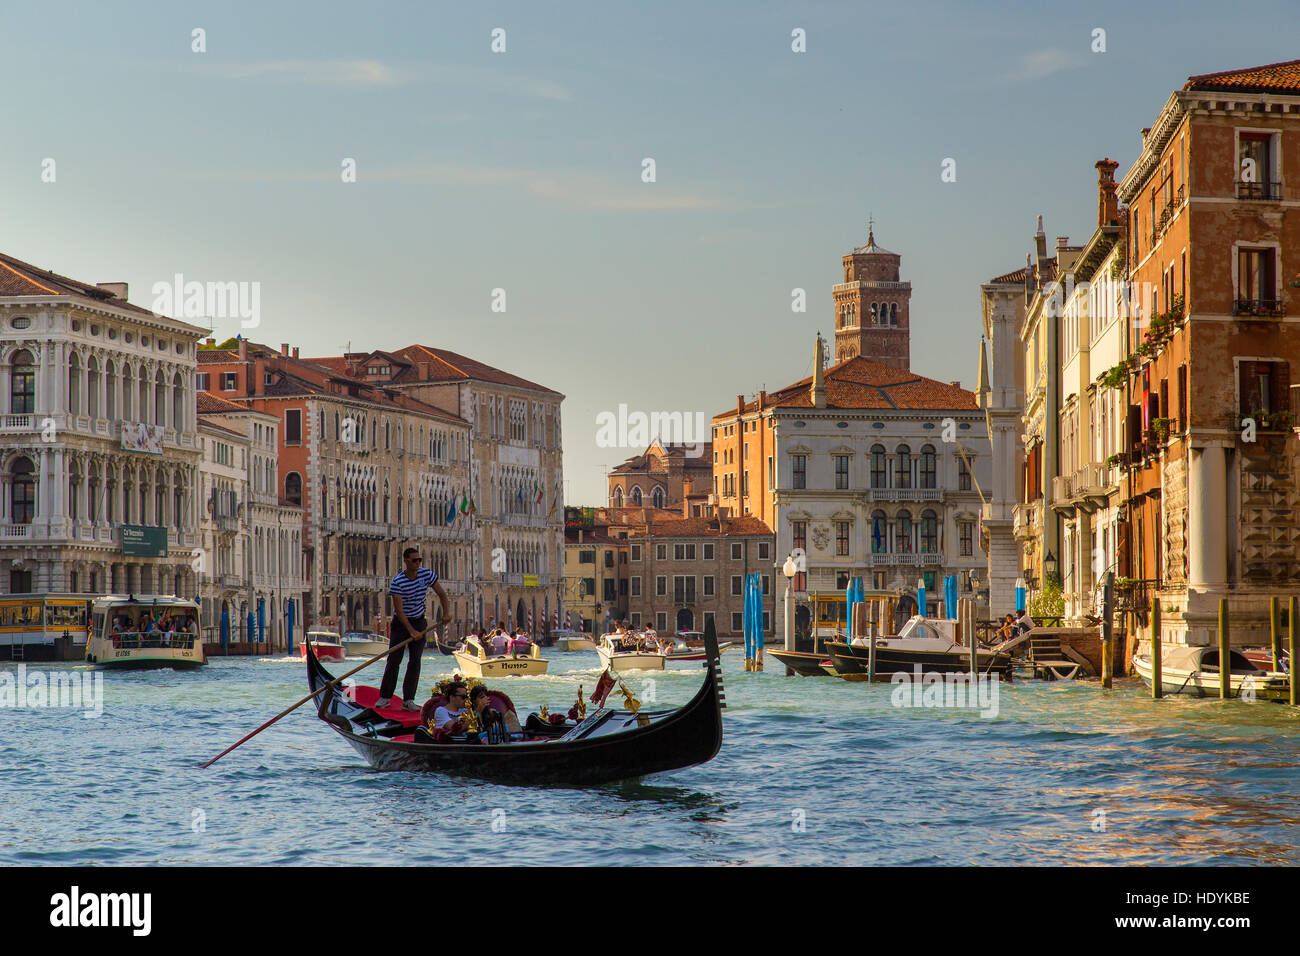 Venice gondola on Grand Canal in the evening sunlight on the water, gondolier and passengers. Stock Photo